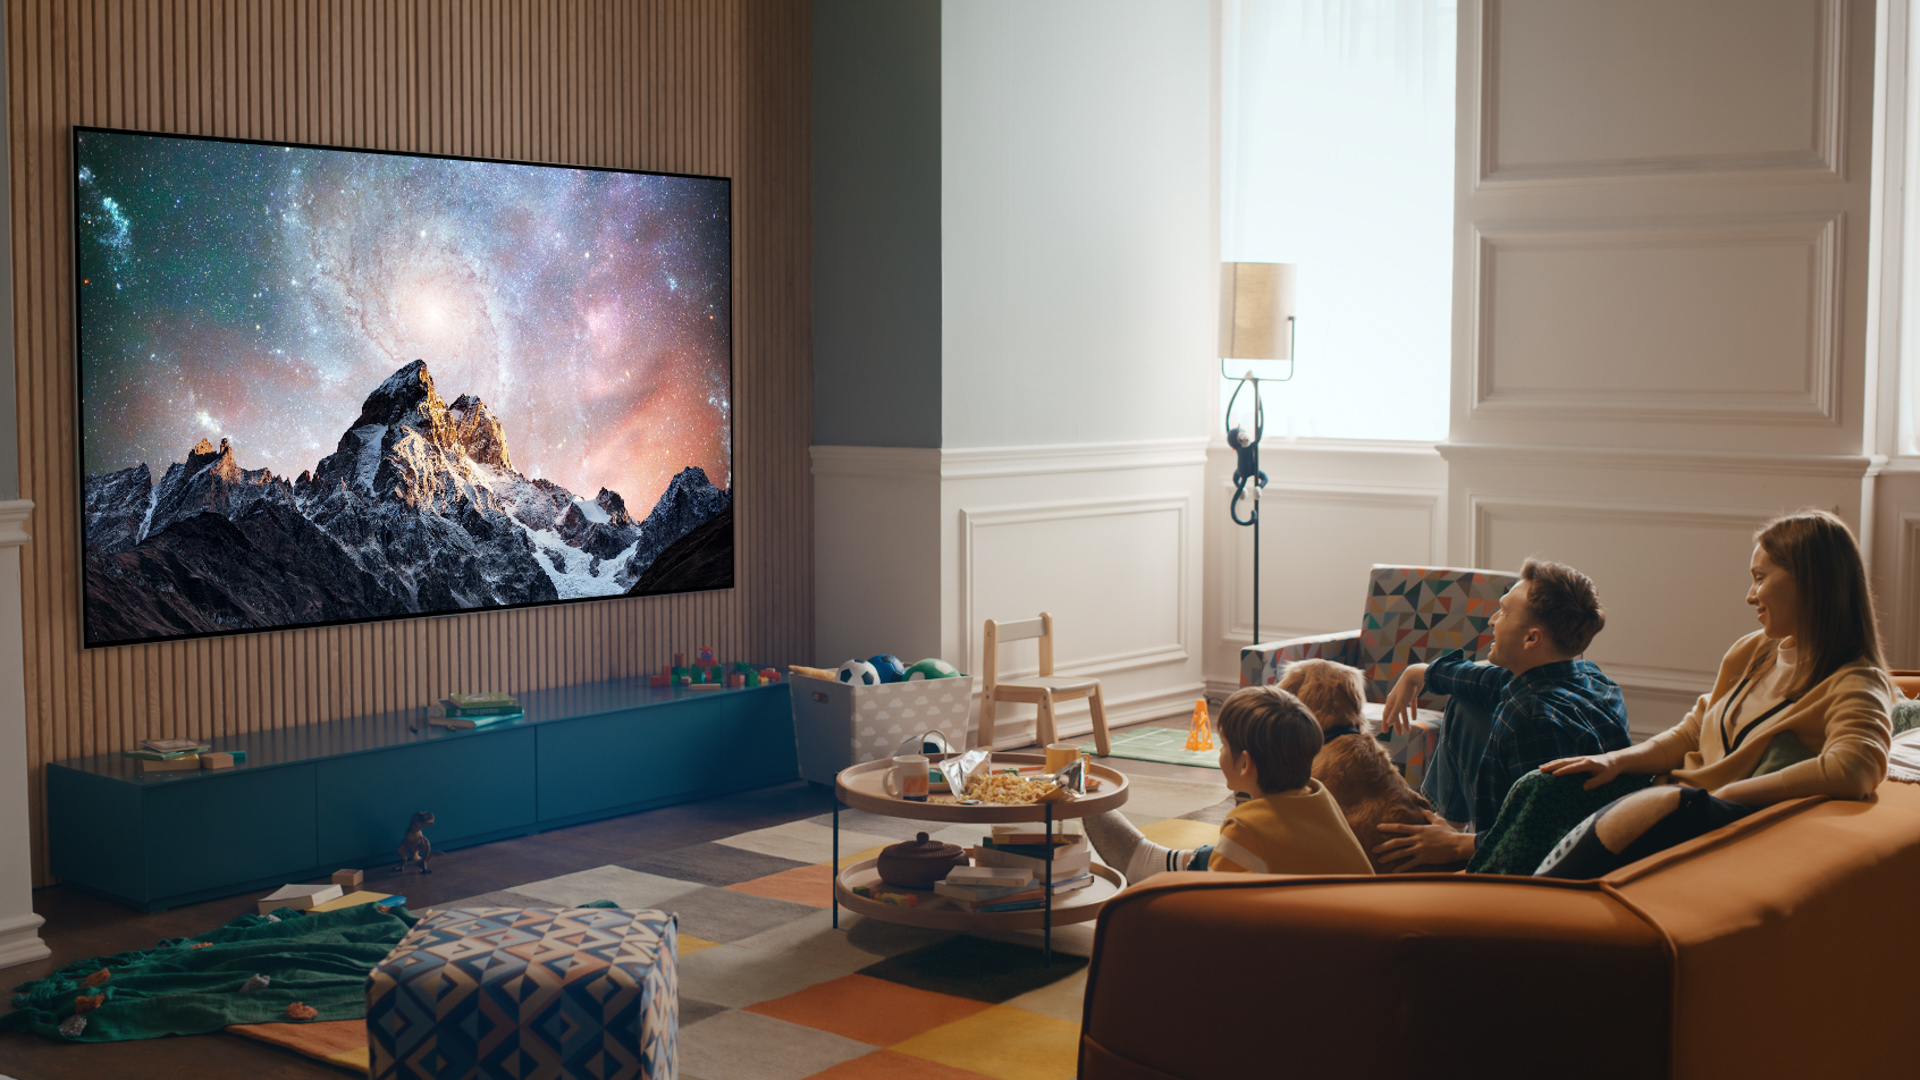 IPS TVs and Home Theater Systems